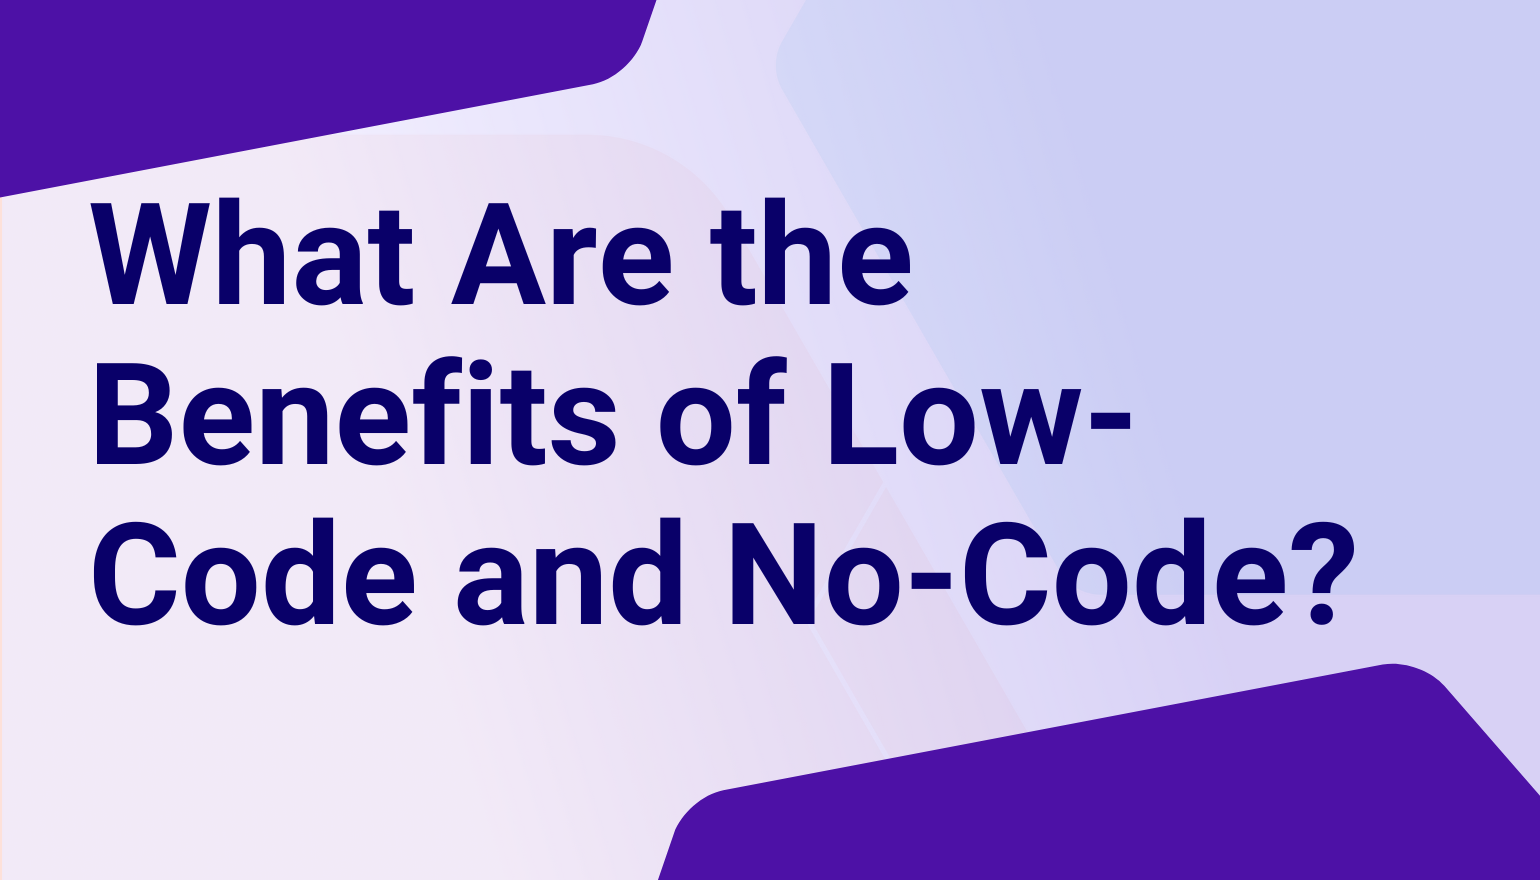 What Are the Benefits of No-Code and Low-Code?